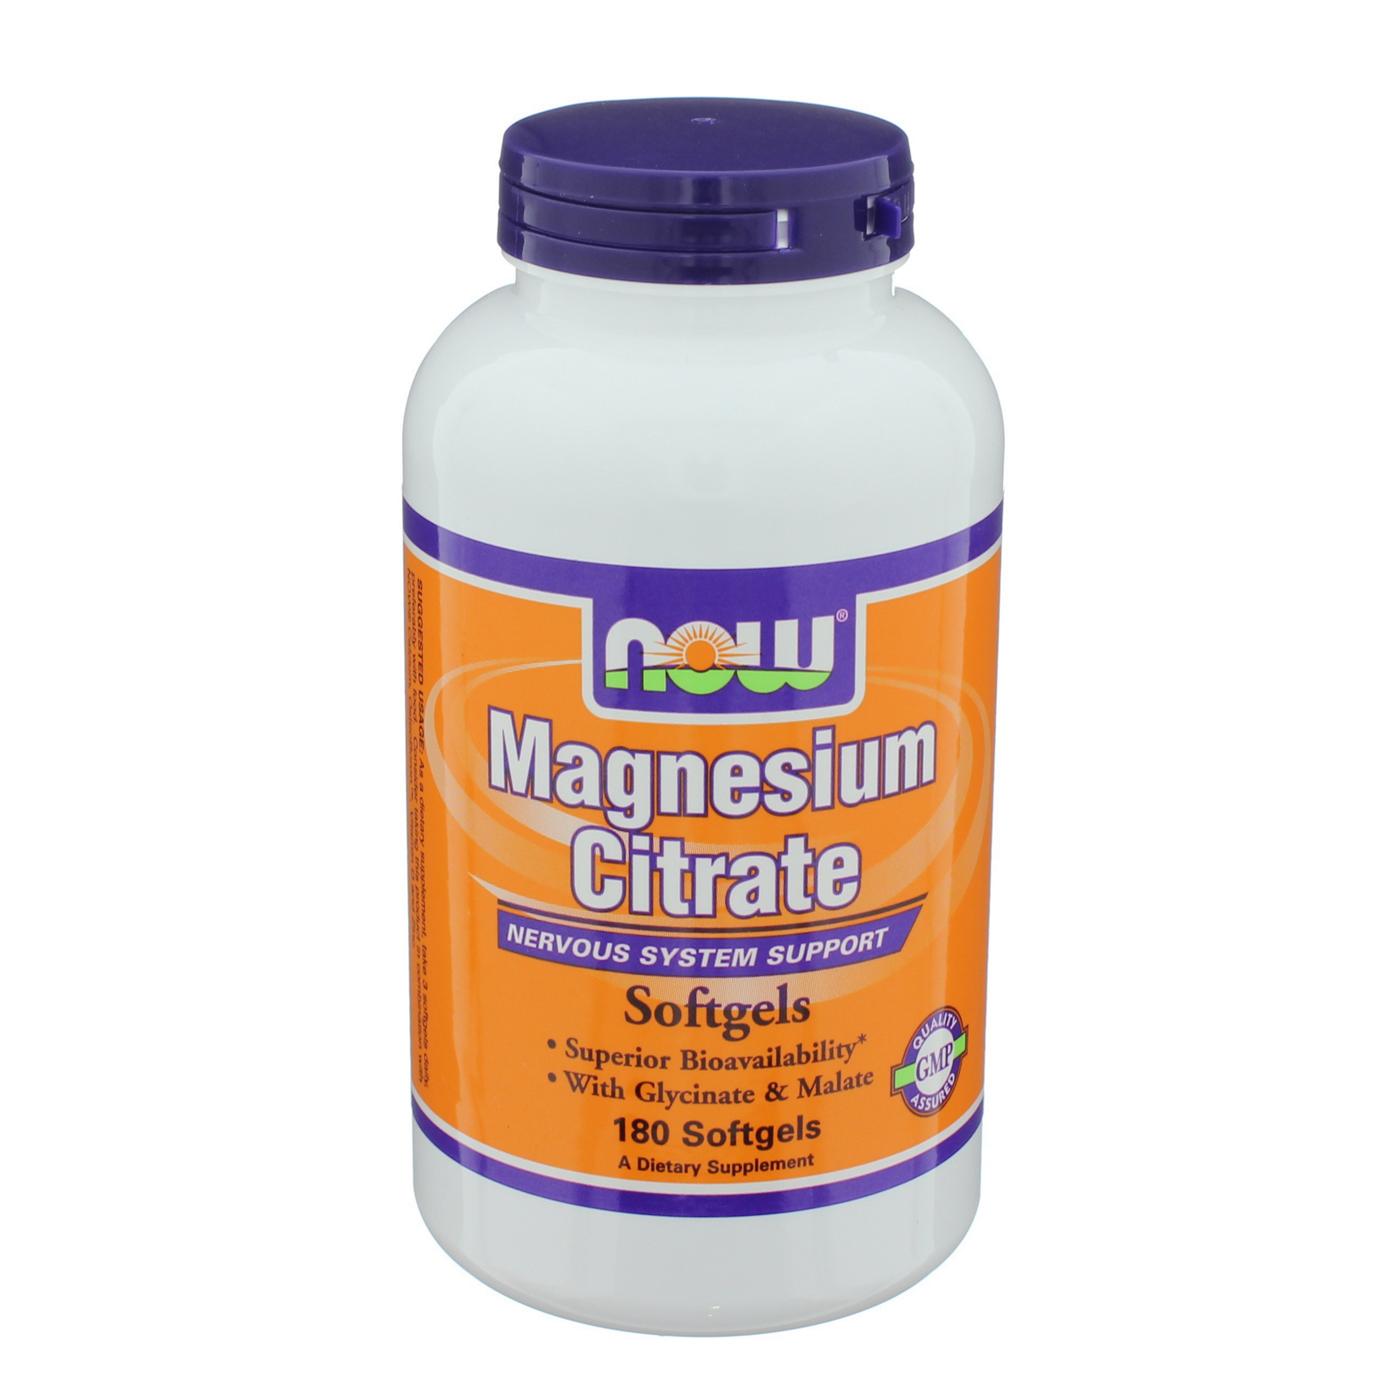 NOW Magnesium Citrate Softgels; image 1 of 2